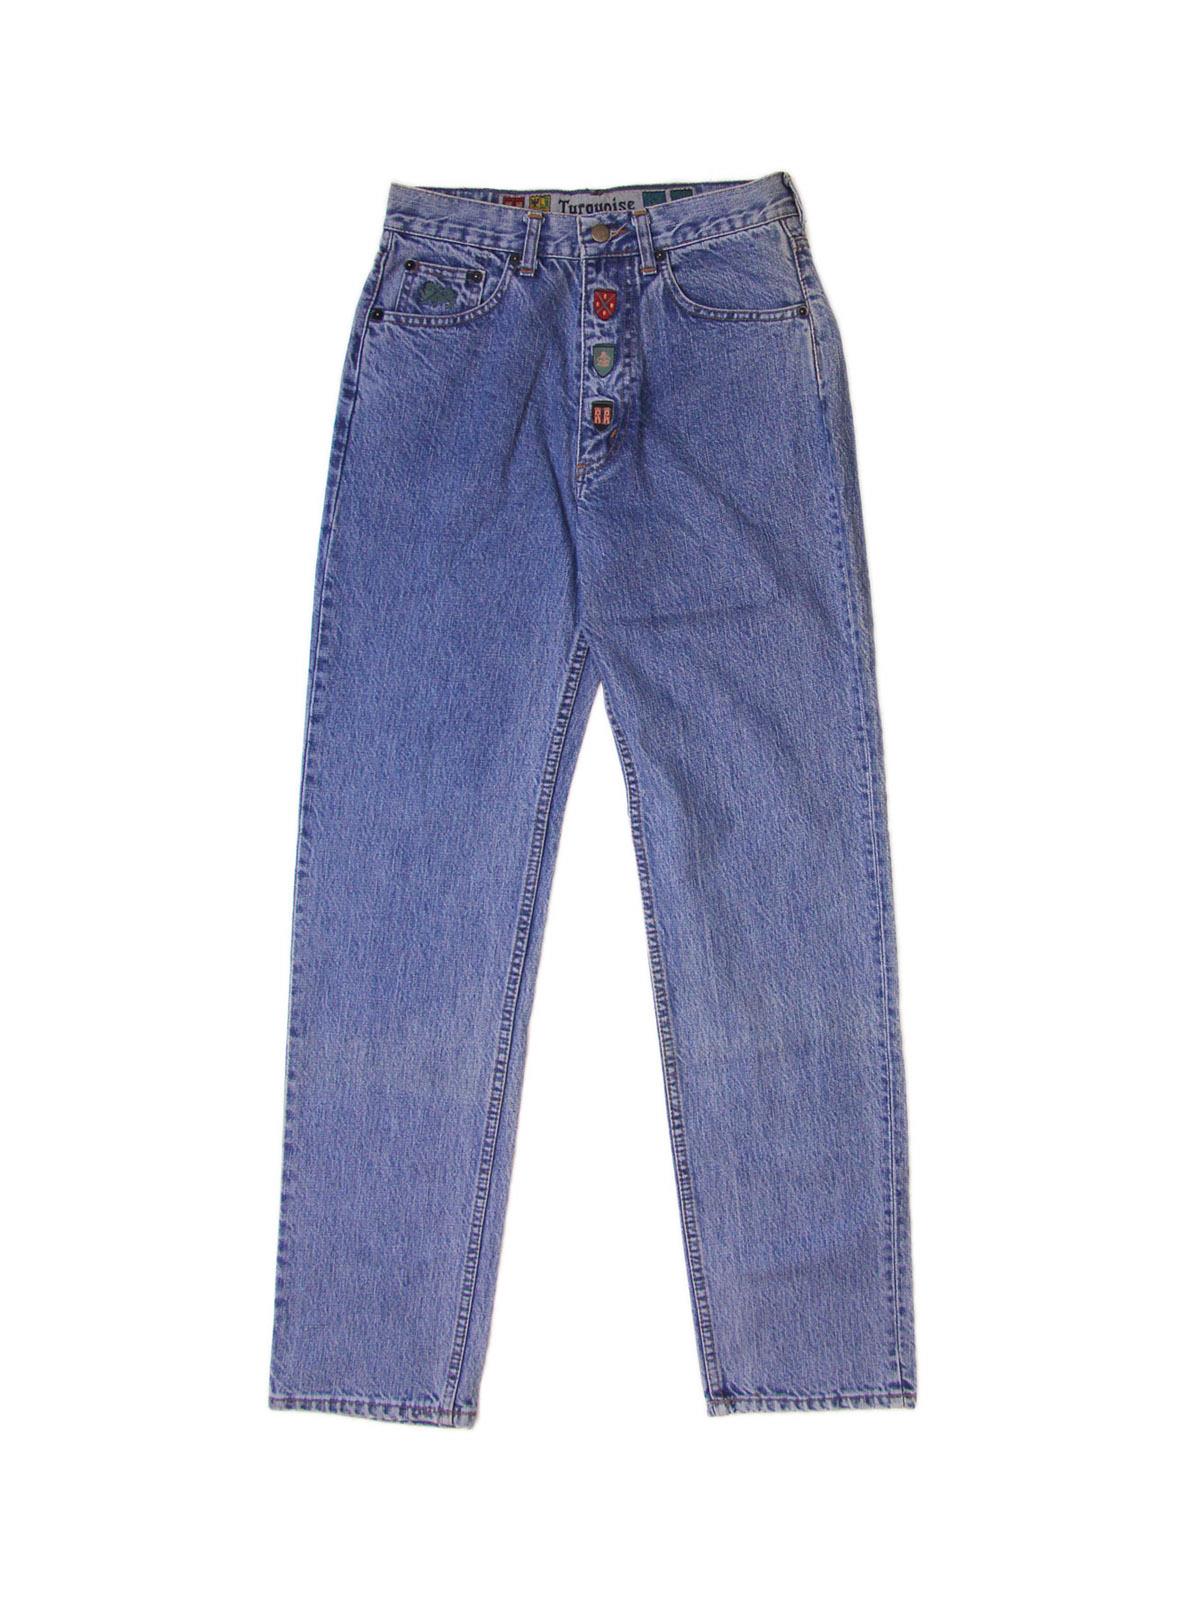 TURQUOISE MANDESON HIGHLANDS JEANS